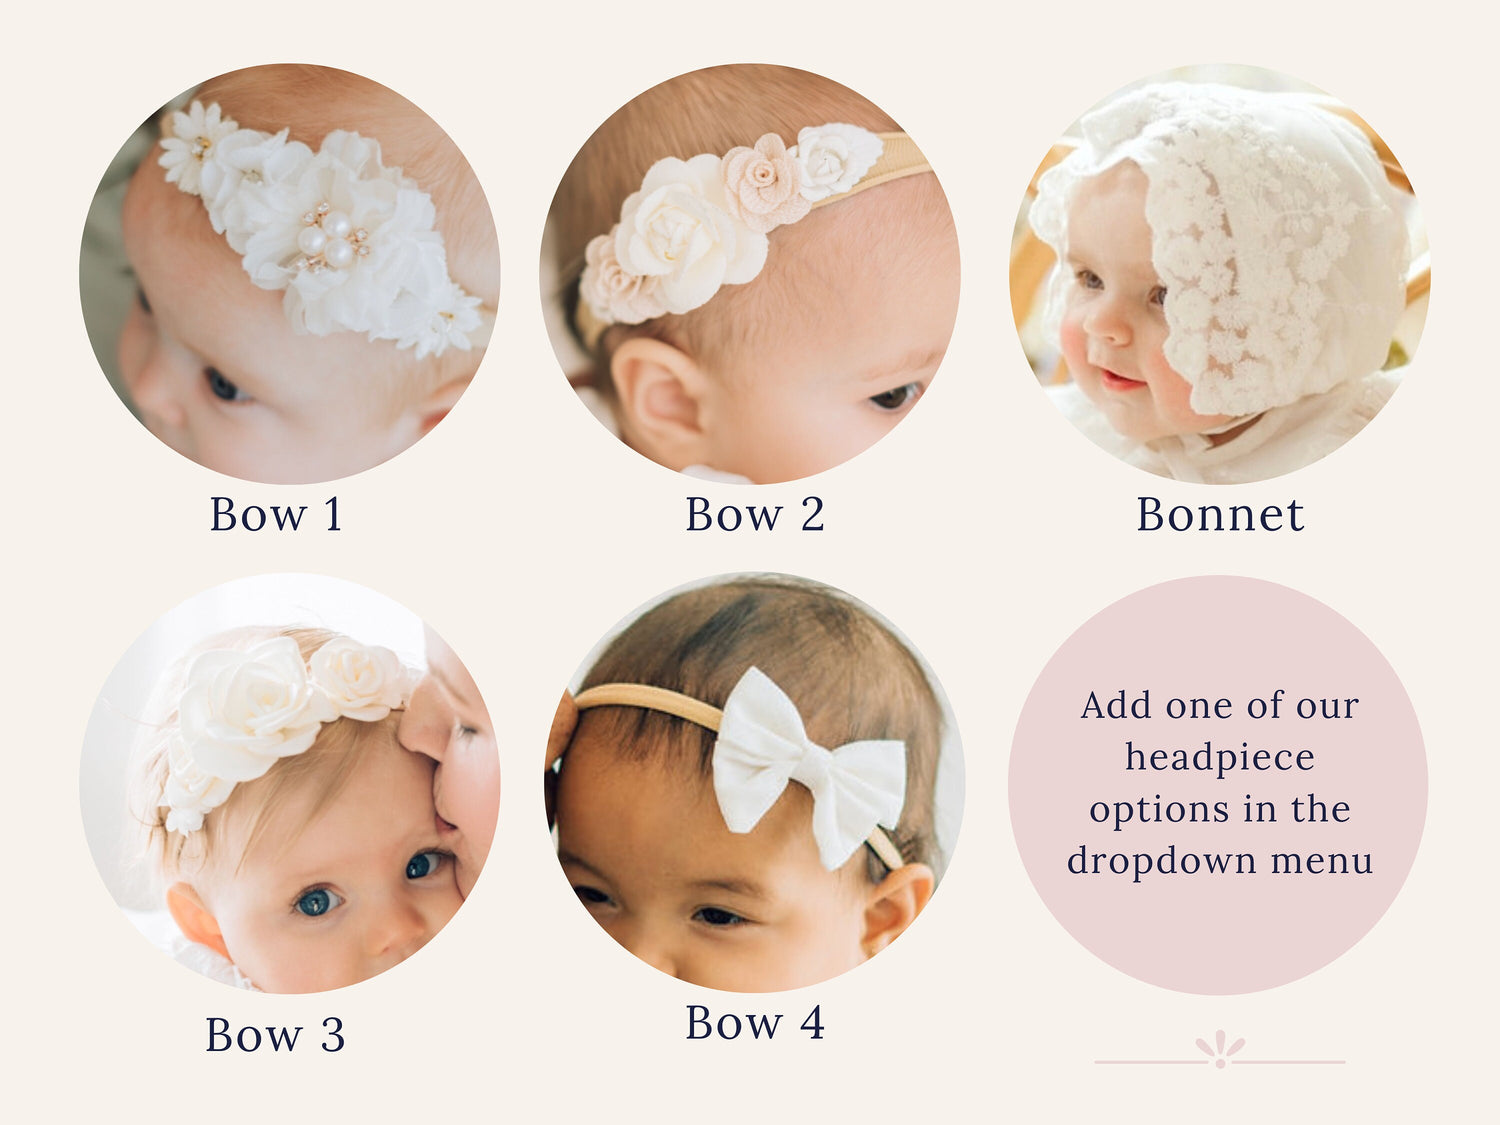 The Eva Jane Gift Set - Blessing/Christening Baptism dress and gift set with headpiece Baby Girl blessing/christening baptism dress